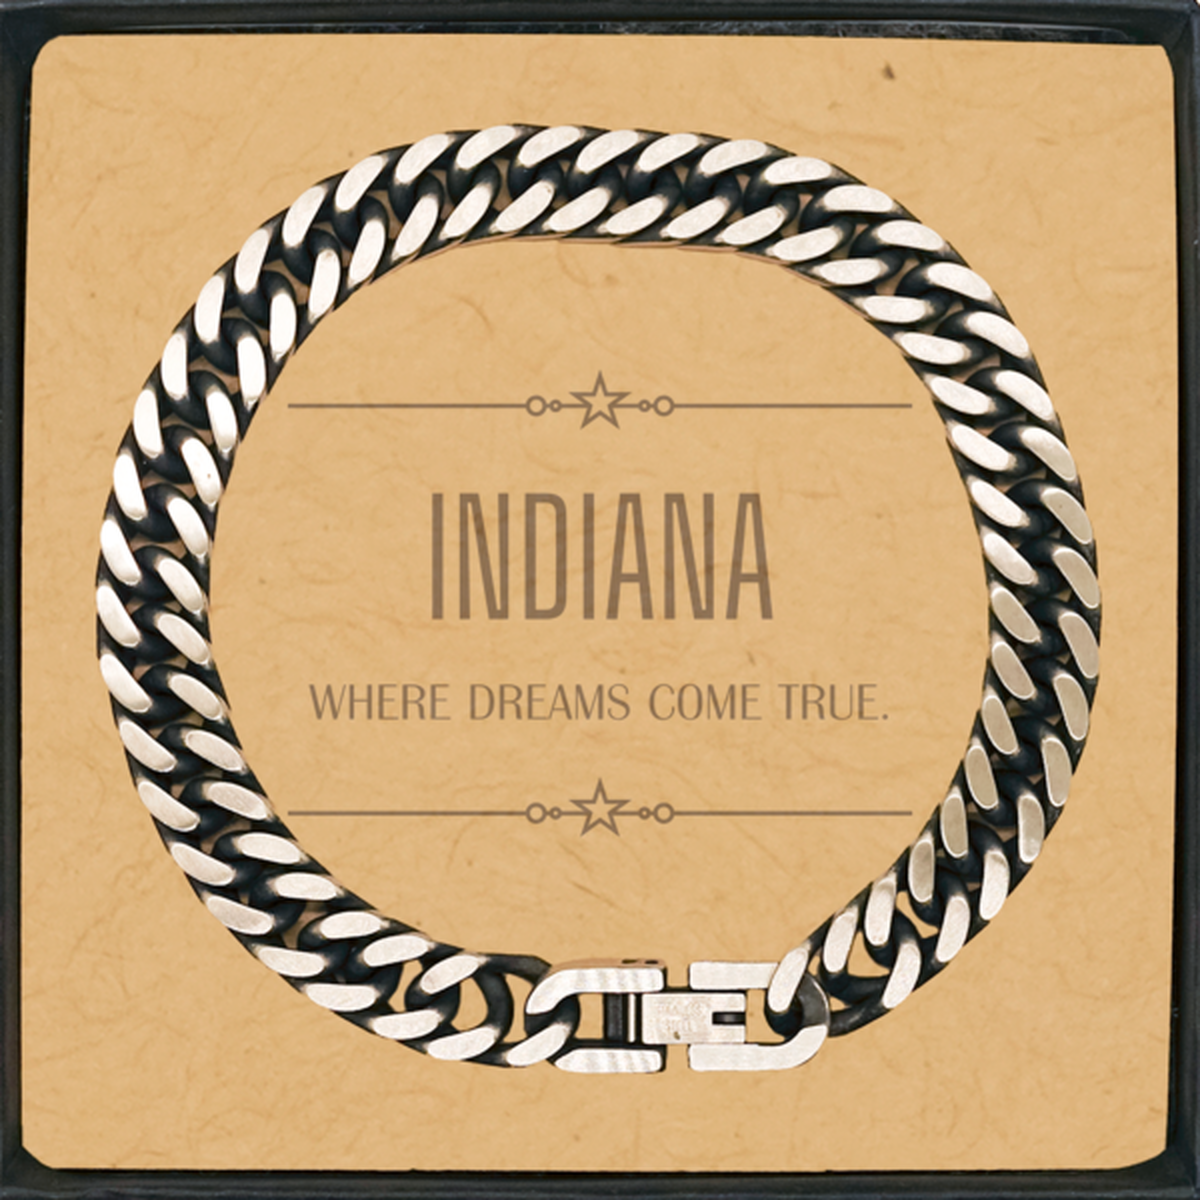 Love Indiana State Cuban Link Chain Bracelet, Indiana Where dreams come true, Birthday Inspirational Gifts For Indiana Men, Women, Friends